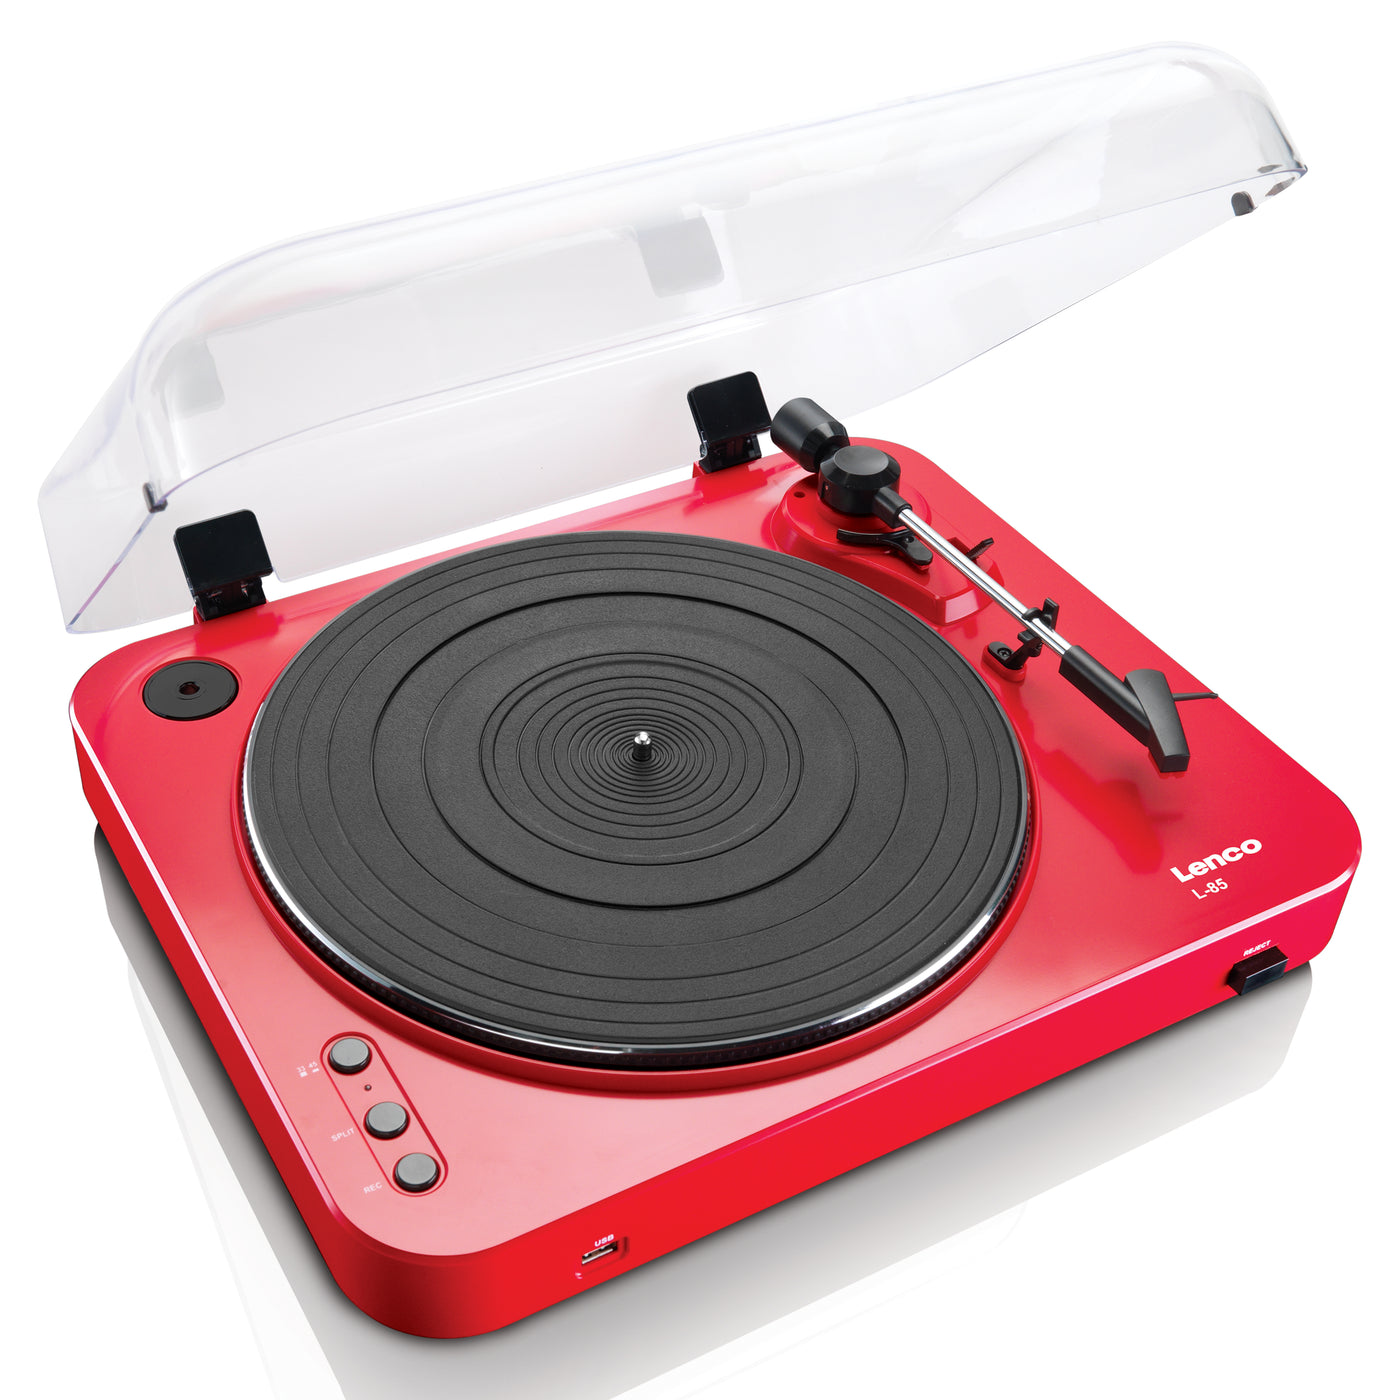 LENCO L-85 Red - Turntable with USB direct encoding - Red